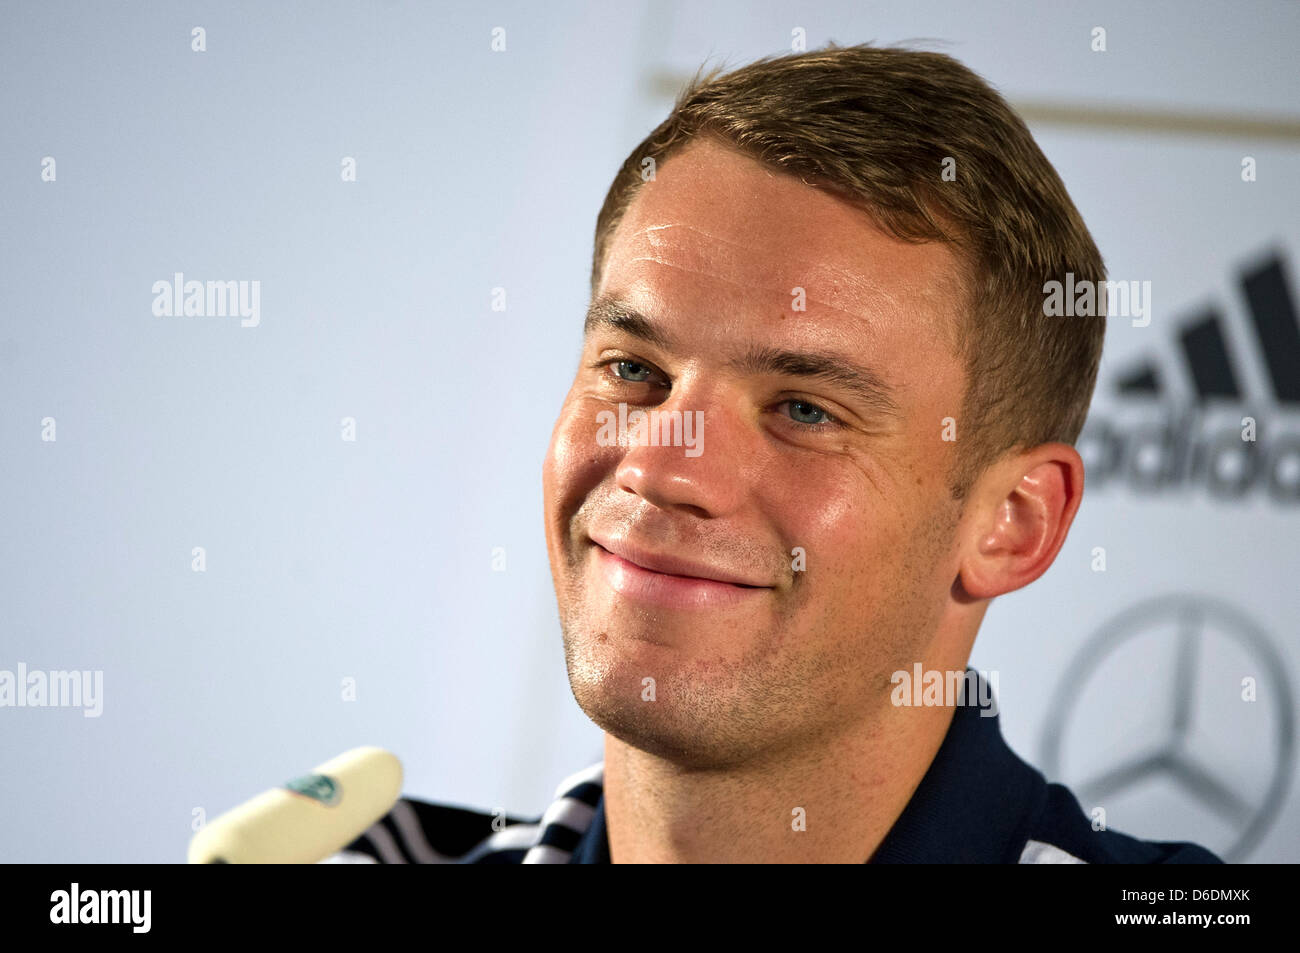 German national soccer goal keeper Manuel Neuer smiles during a press conference of the German Football Association (DFB) in Barsinghausen, Germany, 09 September 2012. The DFB team is currently preparing for an international soccer match against Austria which will be played in Vienna on 11 September 2012. Photo: EMILY WABITSCH Stock Photo